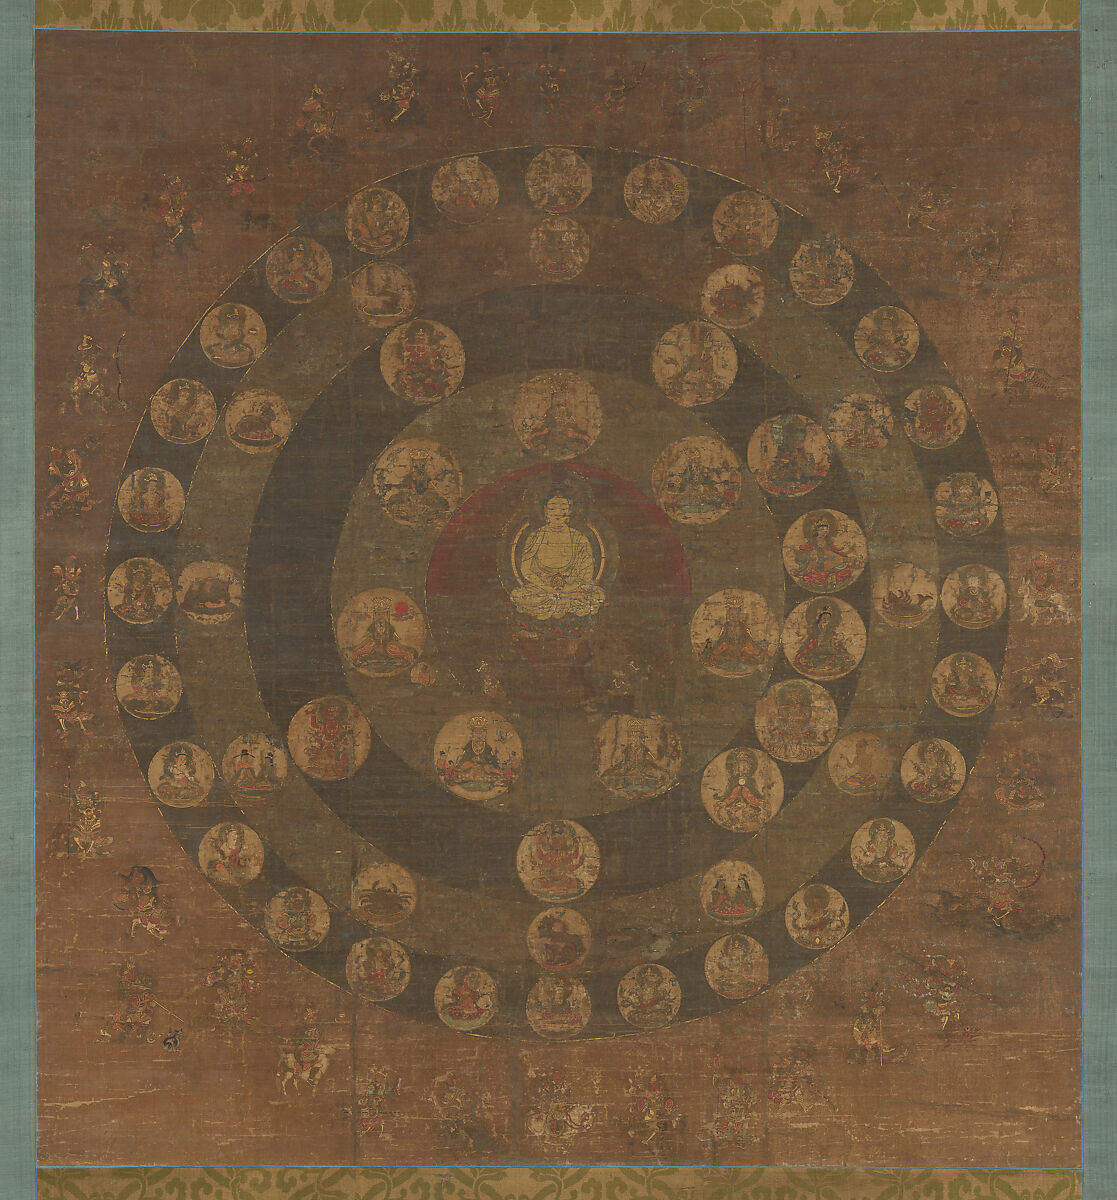 Star Mandala, Hanging scroll; ink, color, gold, and cut gold on silk, Japan 